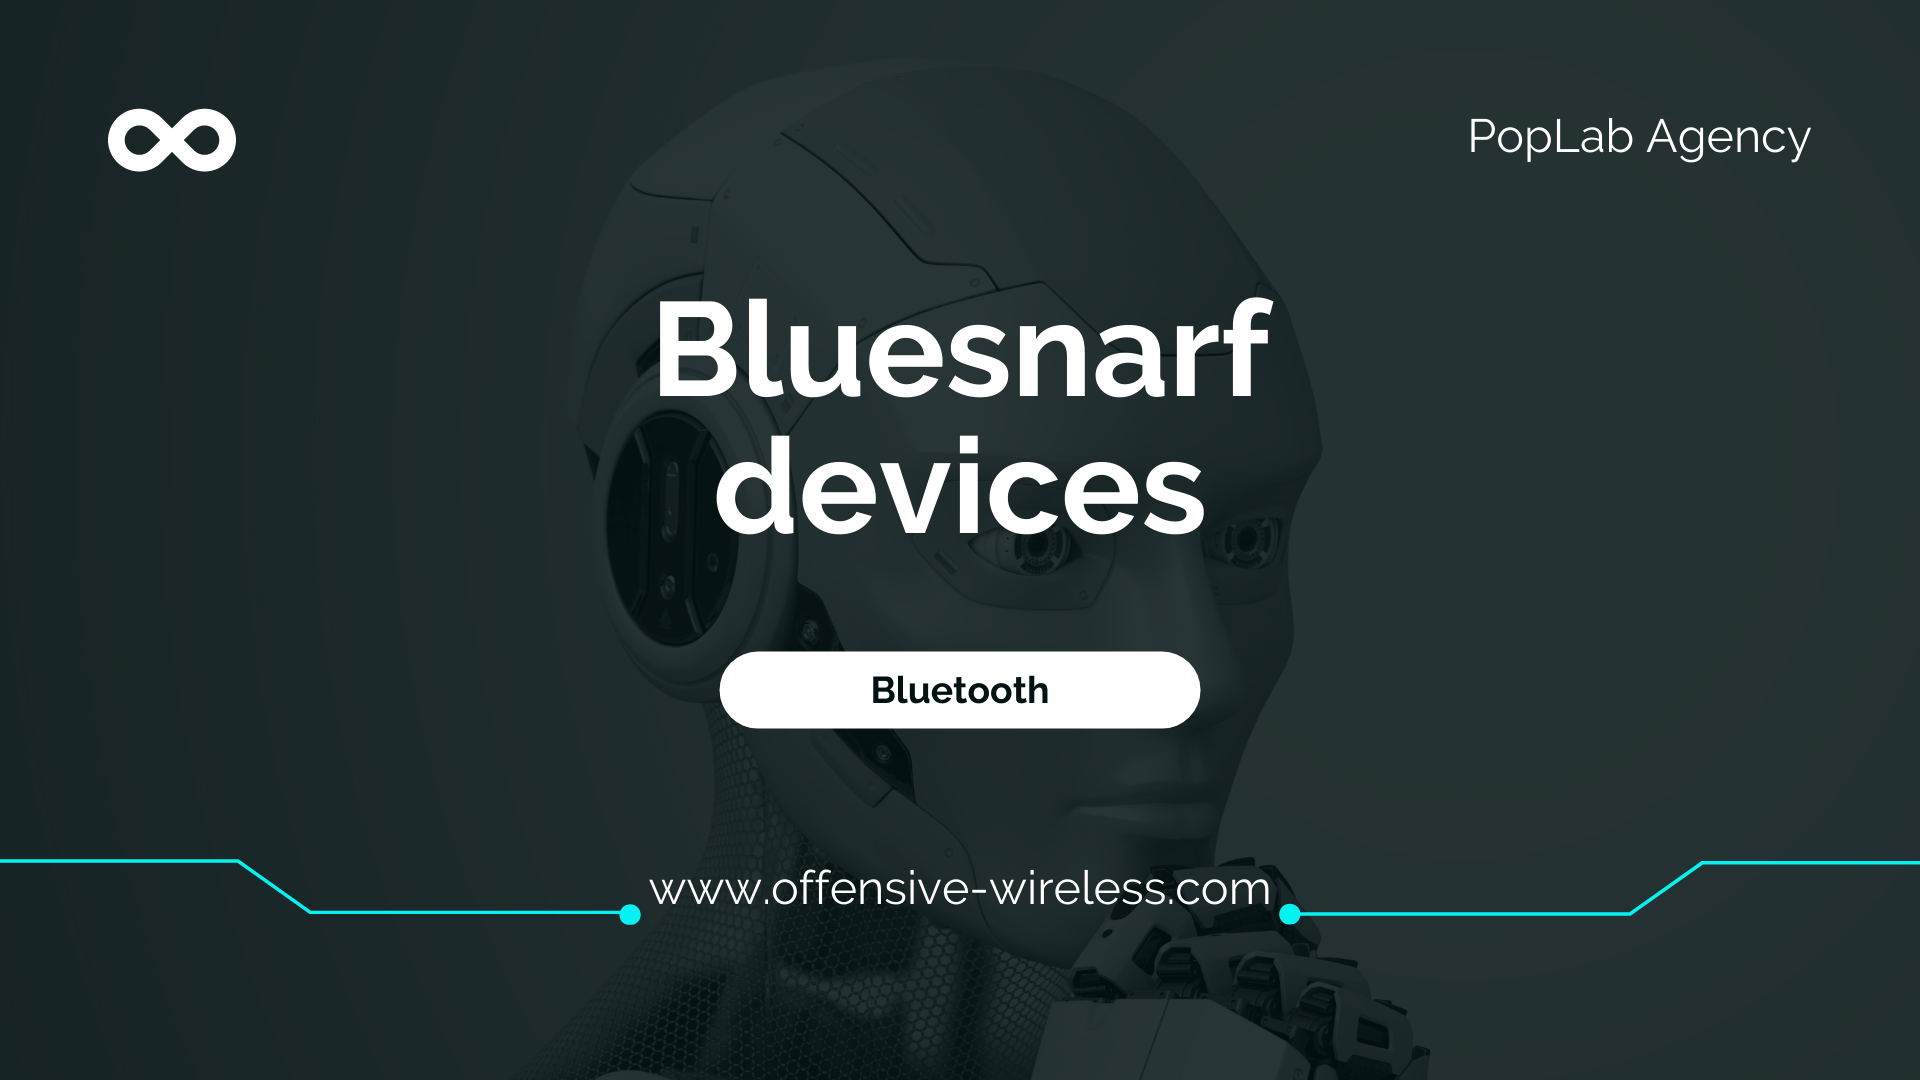 How to Bluesnarf devices